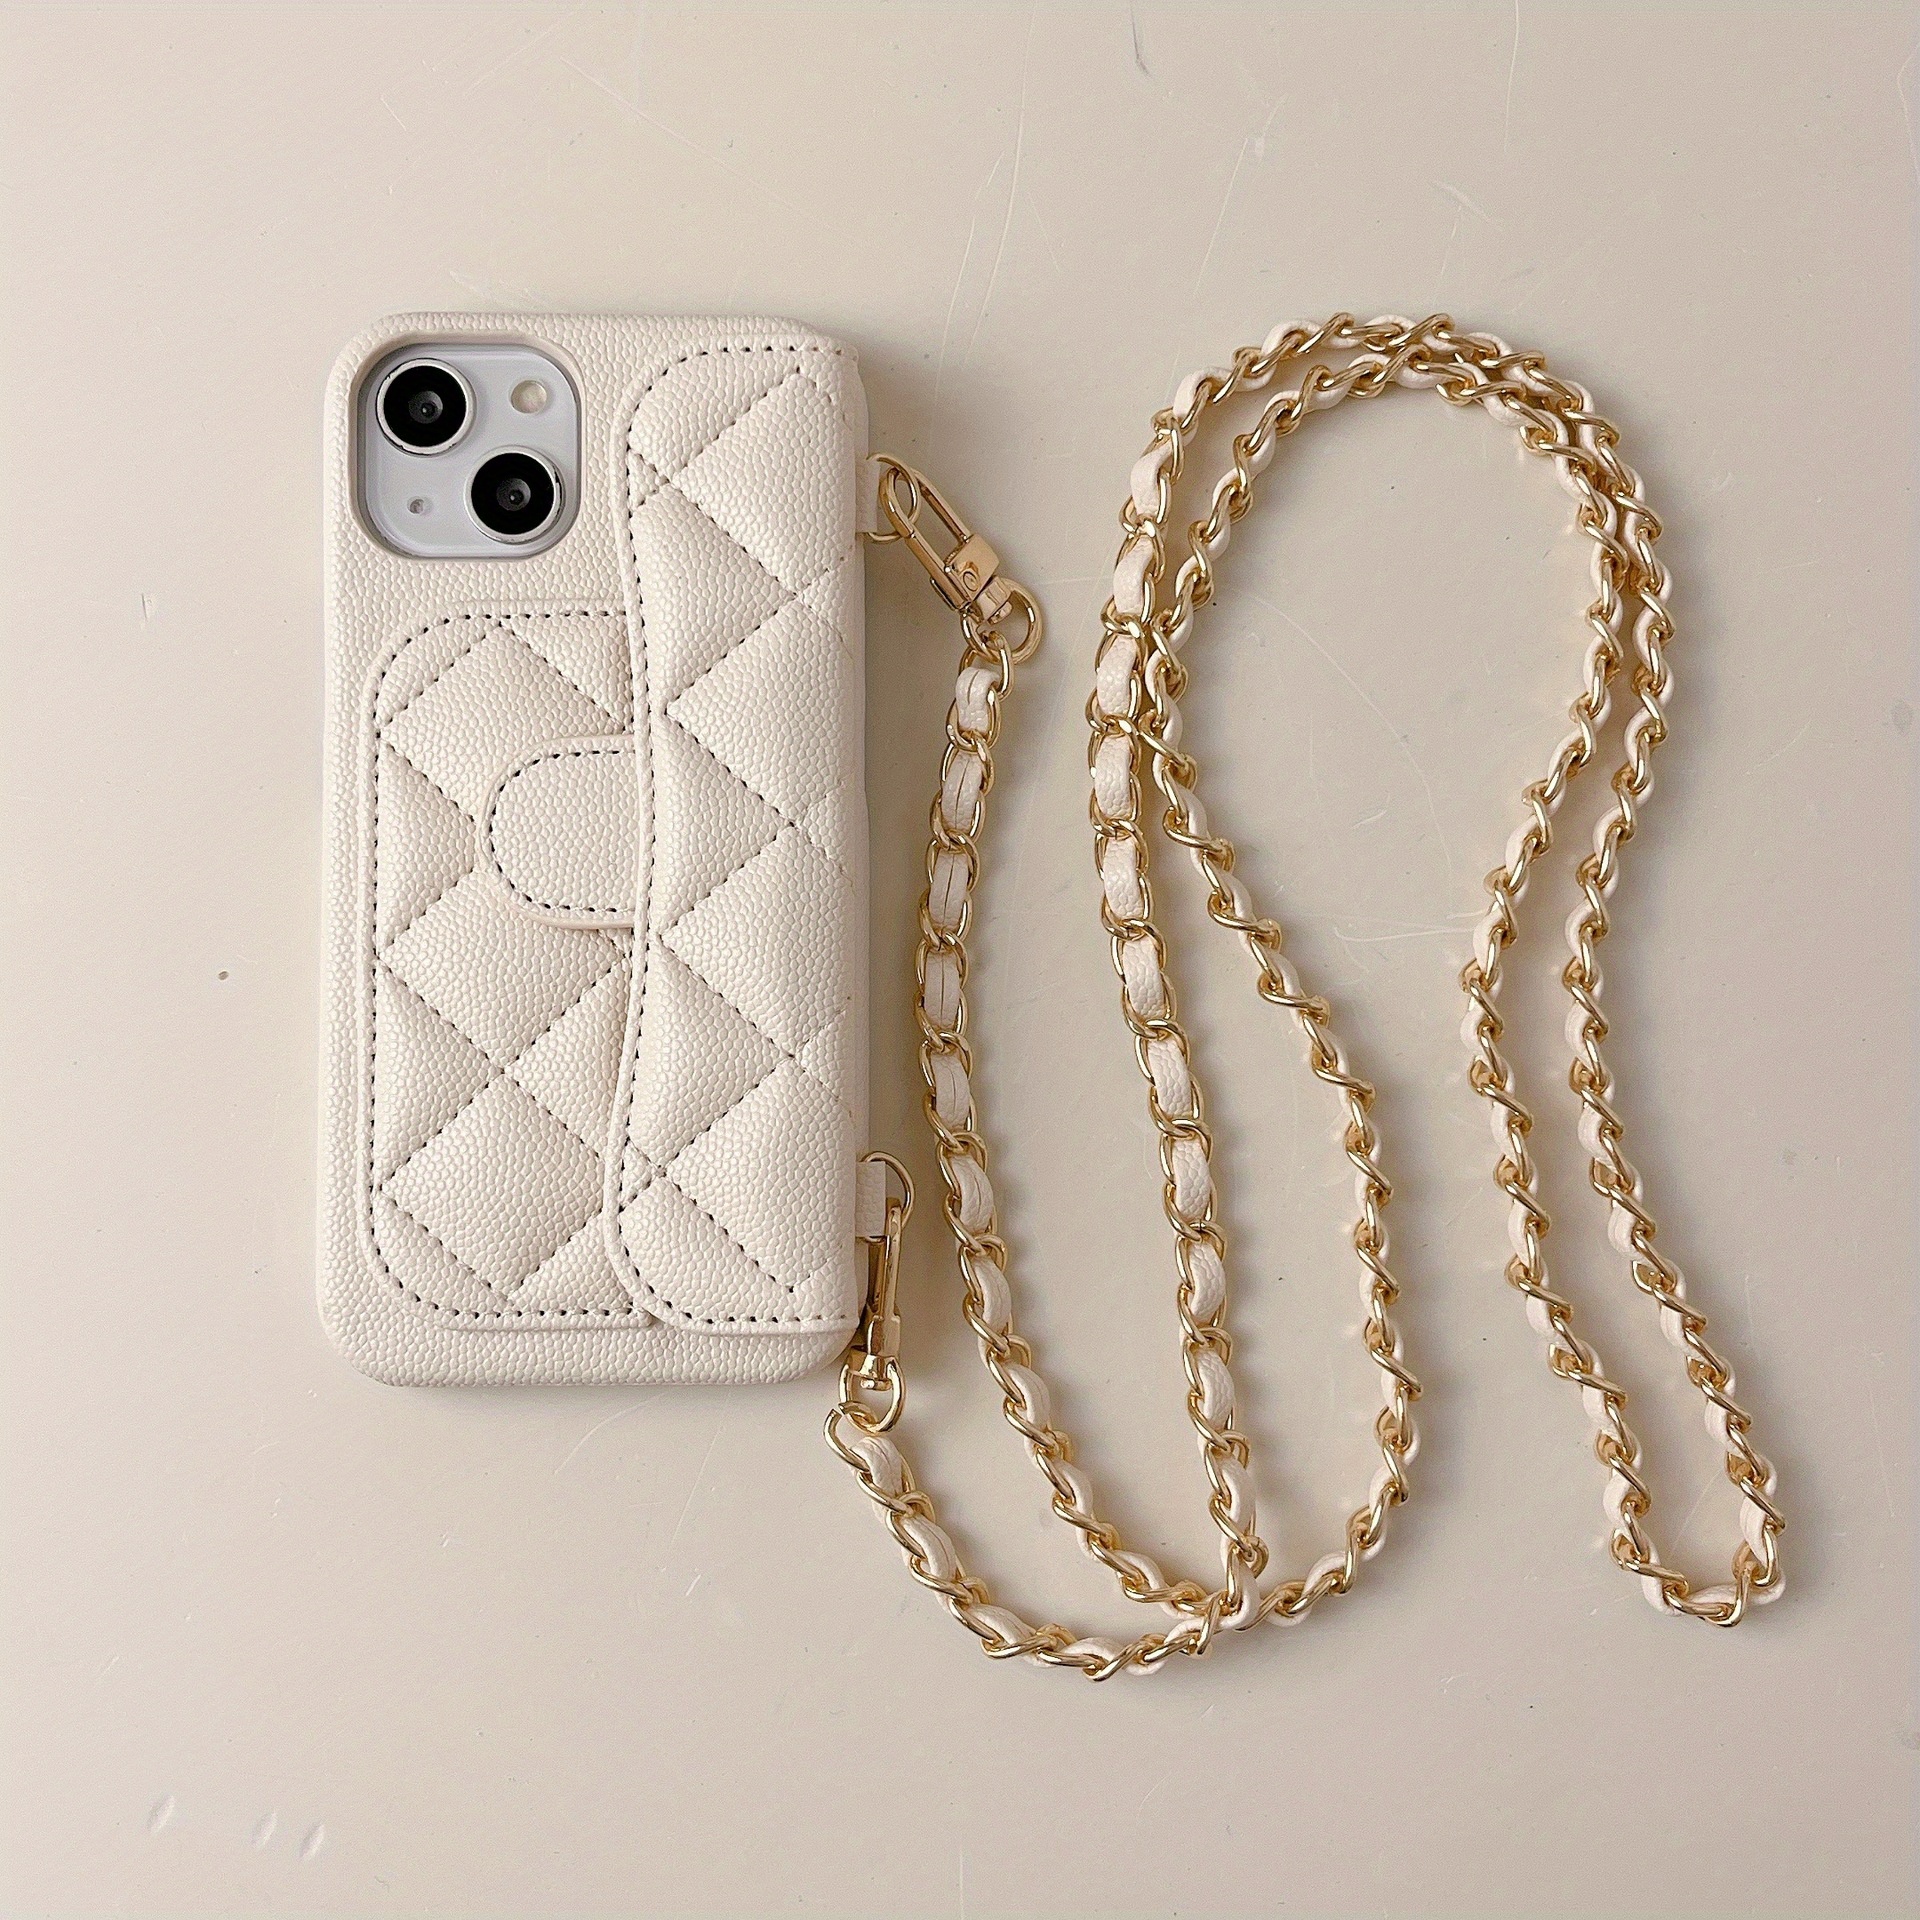 Chanel Iphone case  Chanel iphone case, Chanel phone case, Girly phone  cases